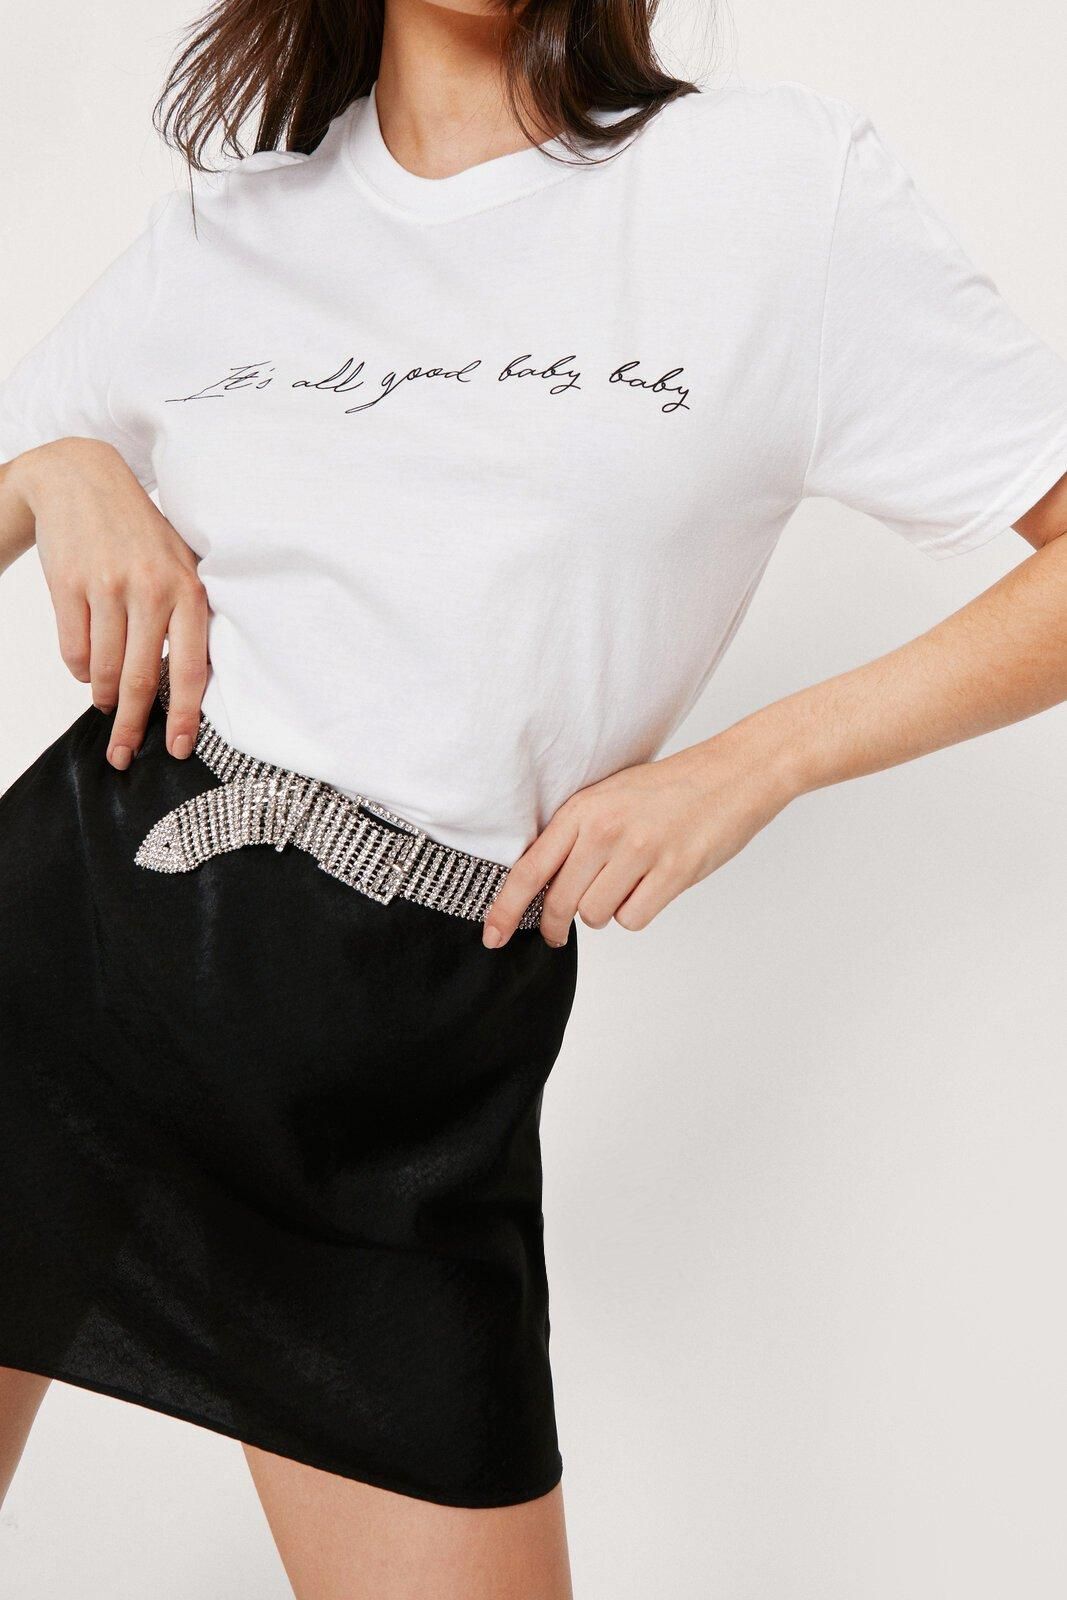 It's All Good Baby Baby Relaxed Tee | NastyGal (US & CA)